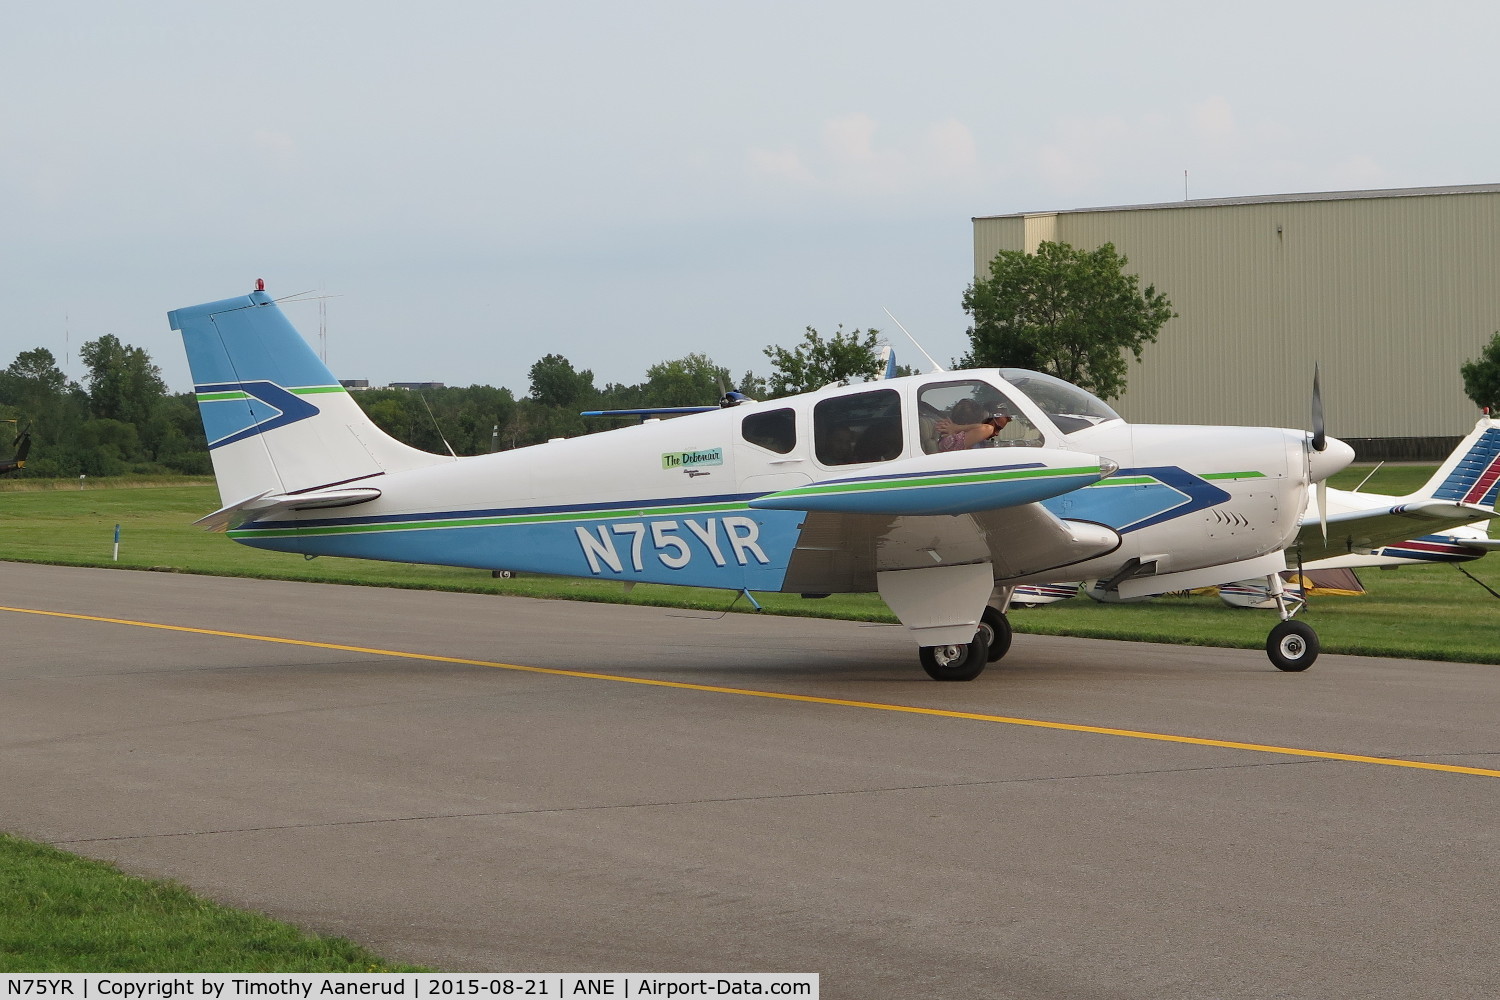 N75YR, 1963 Beech 35-B33 Debonair C/N CD-685, 1963 Beech 35-B33, c/n: CD-685, 2015 AOPA FLY-IN Minneapolis, MN